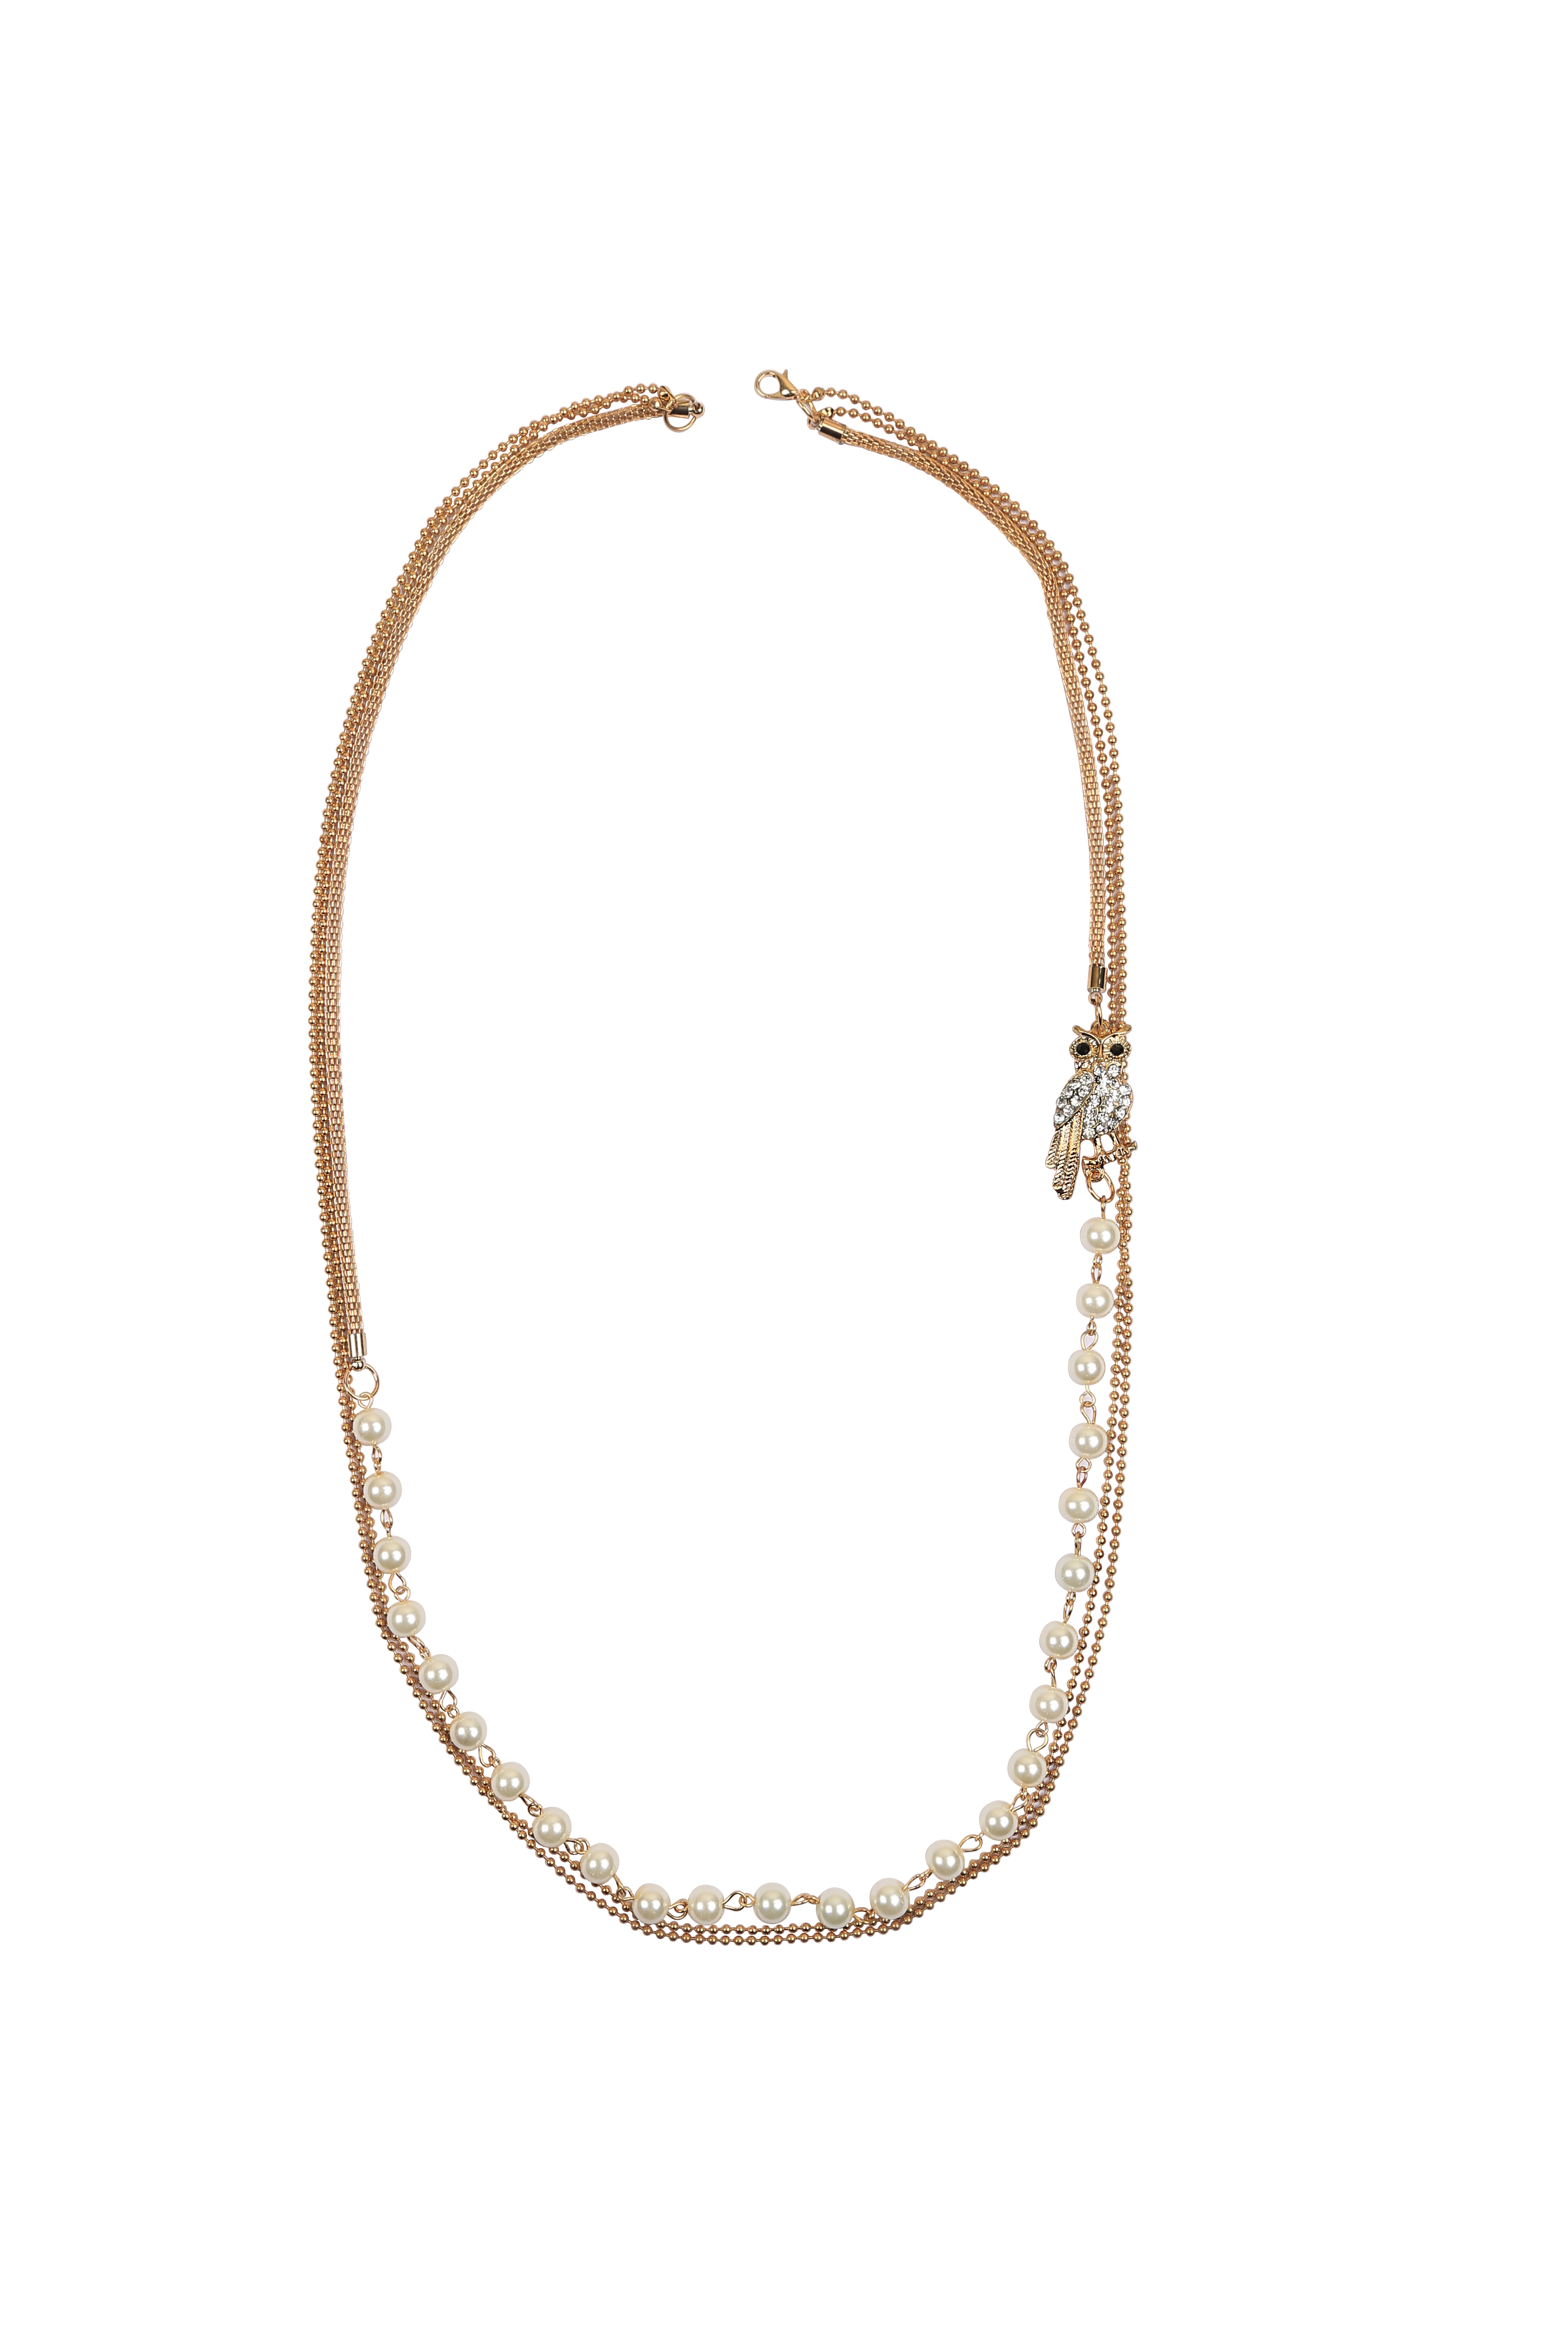 Classy meets chic in the Reigning Pearls collection from Eristona.com